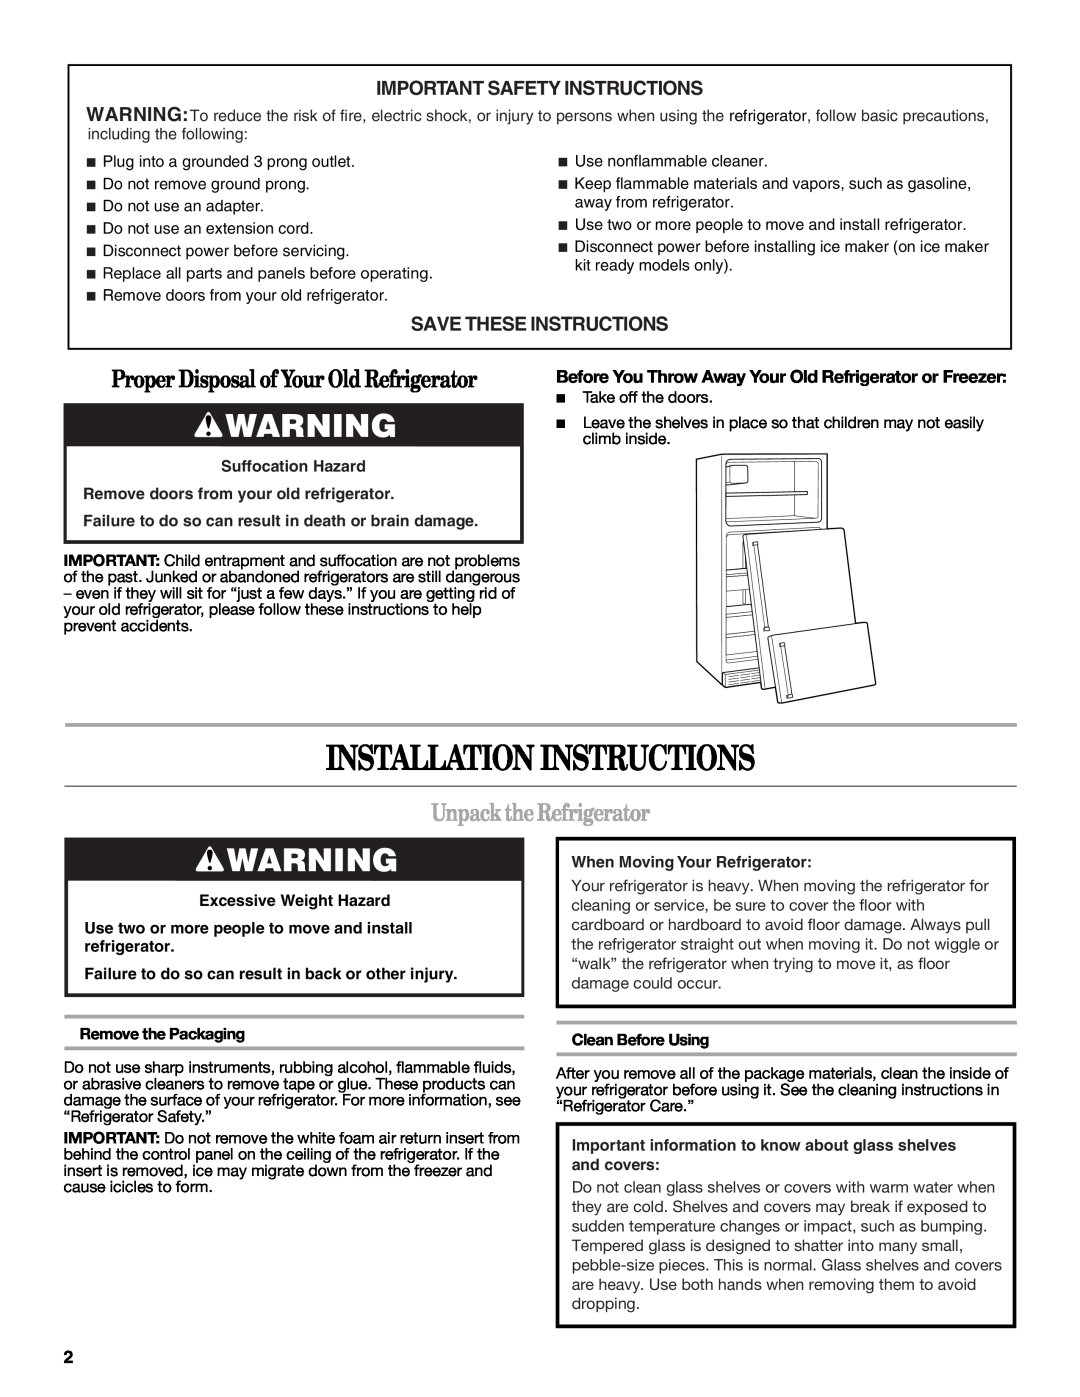 Whirlpool W10312242A Installation Instructions, Unpack the Refrigerator, Important Safety Instructions, Clean Before Using 